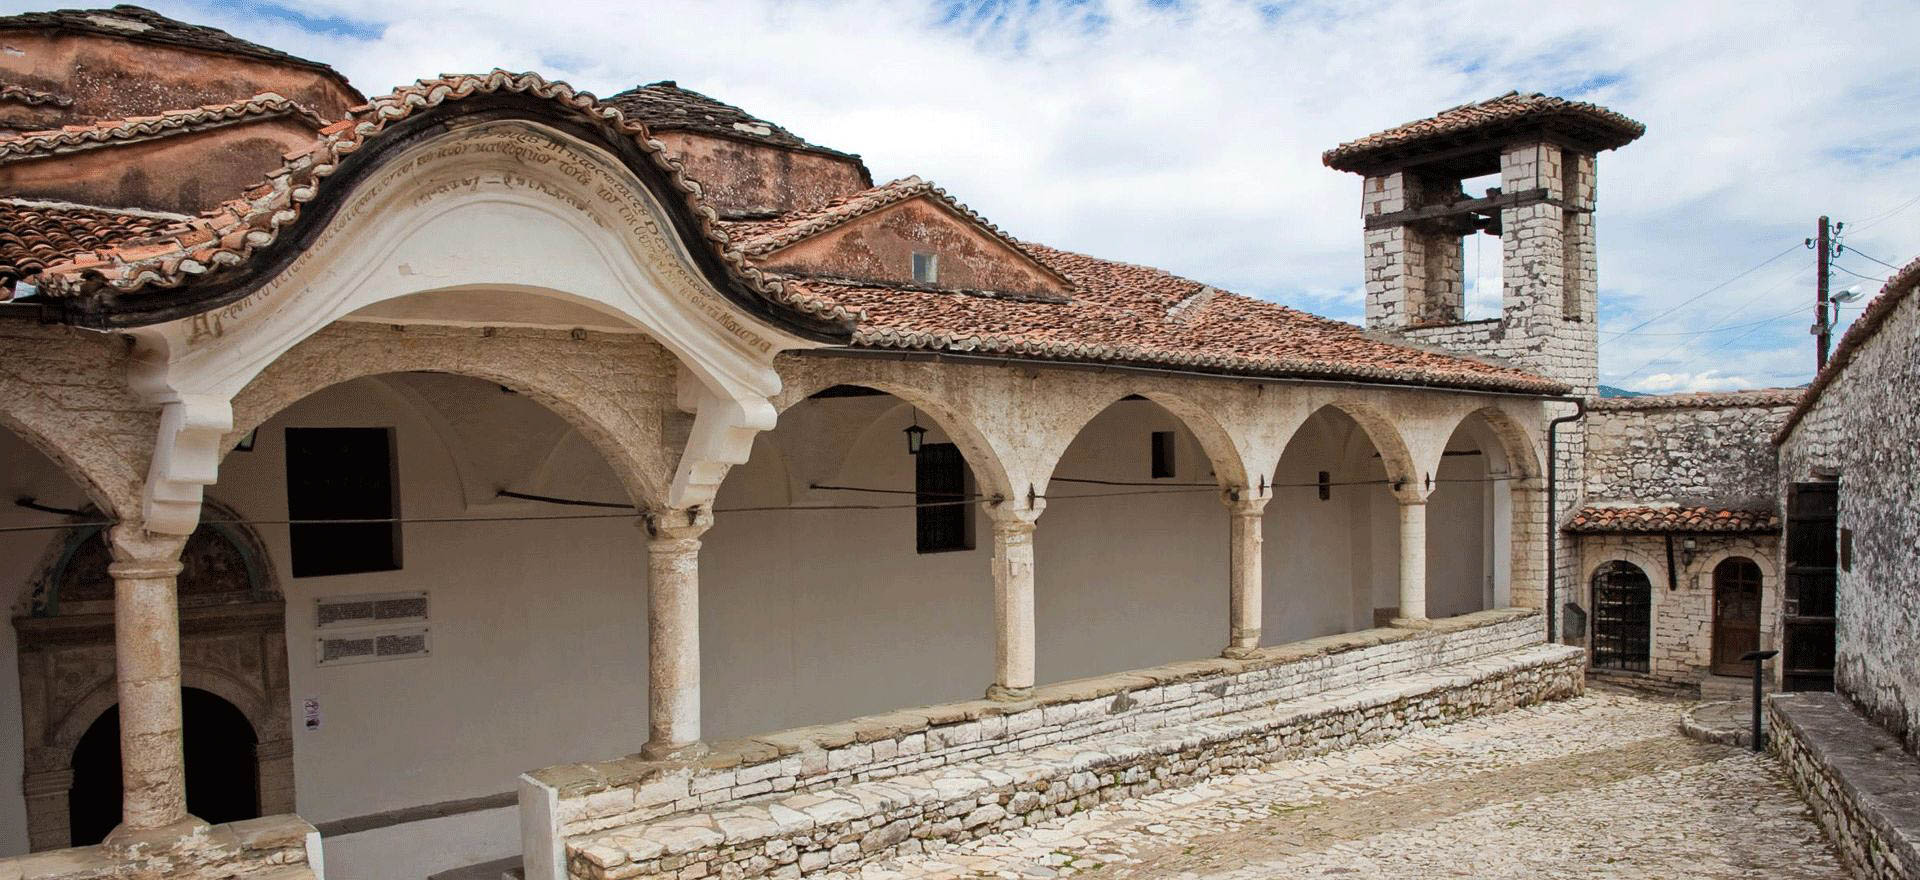 Albania Holidays and tours - typical architecture in Berat